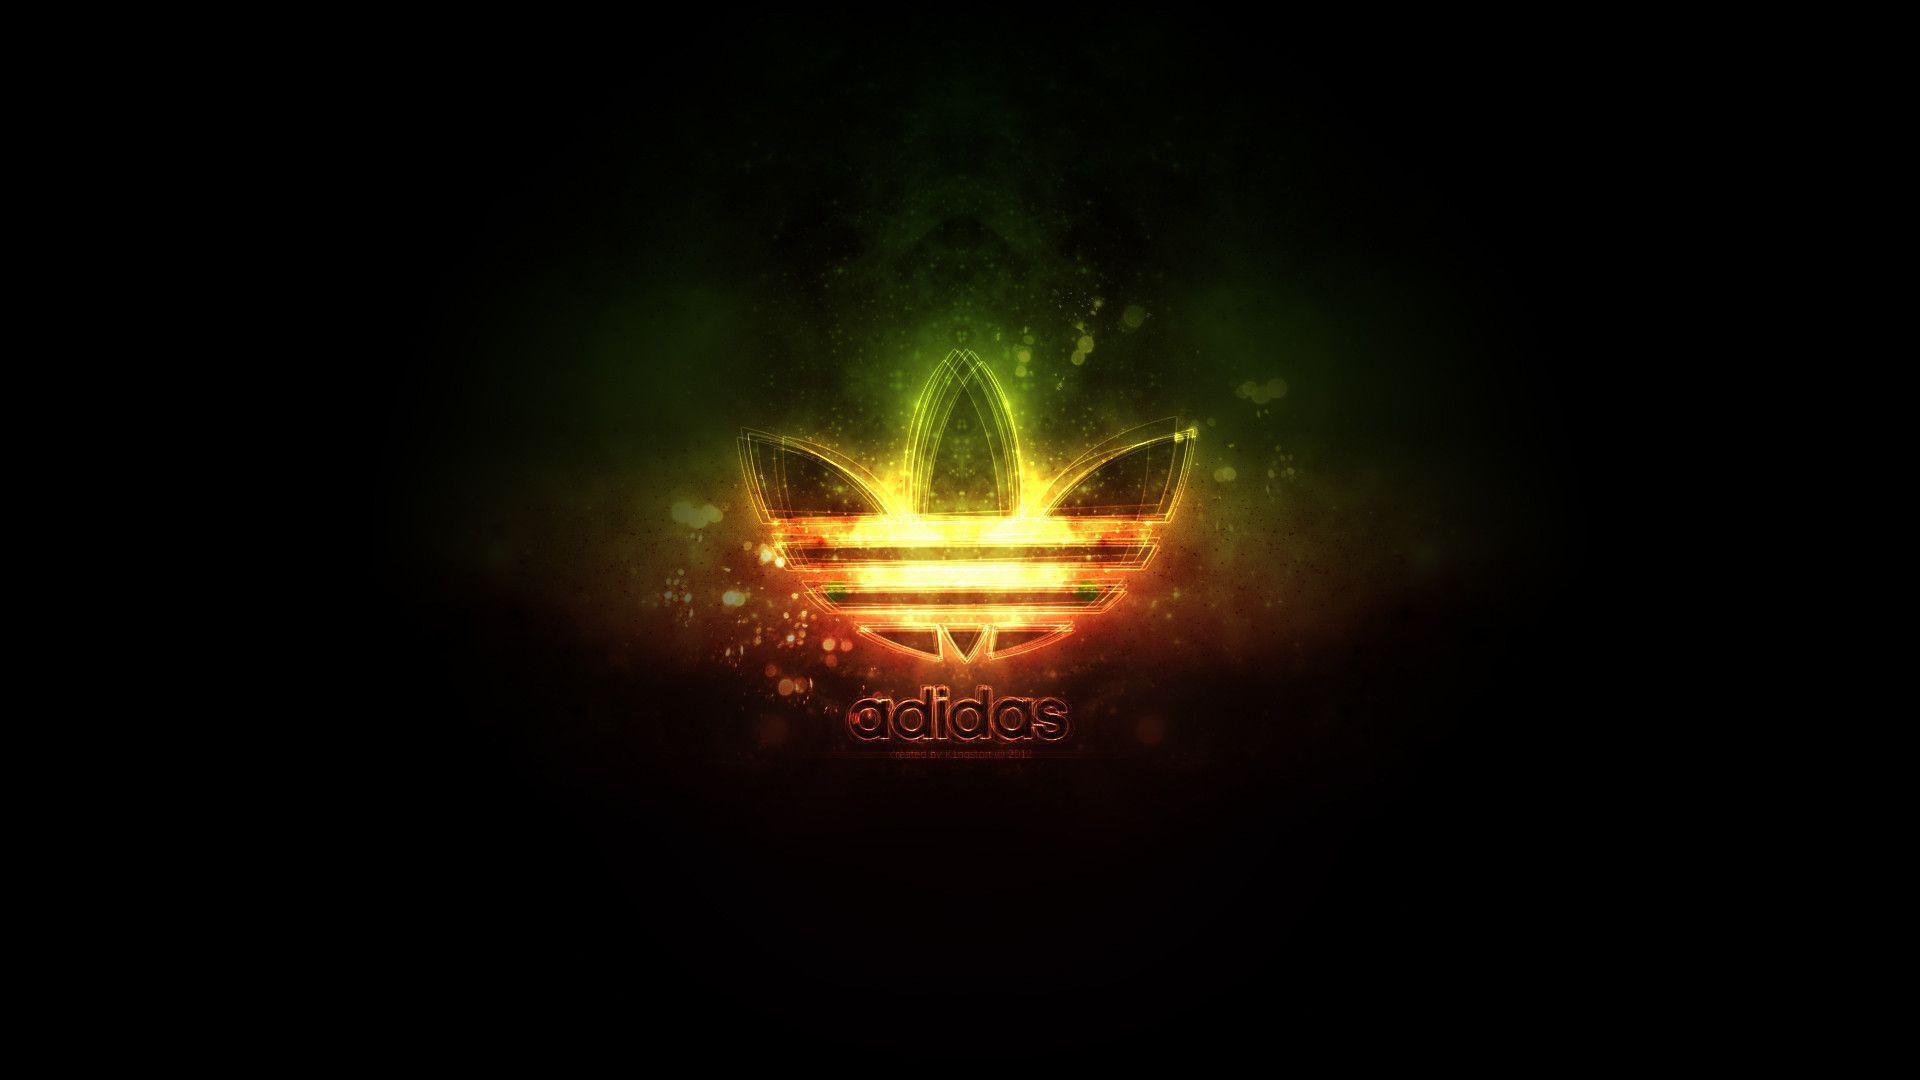 Adidas Logo Wallpapers HD by k1ngston